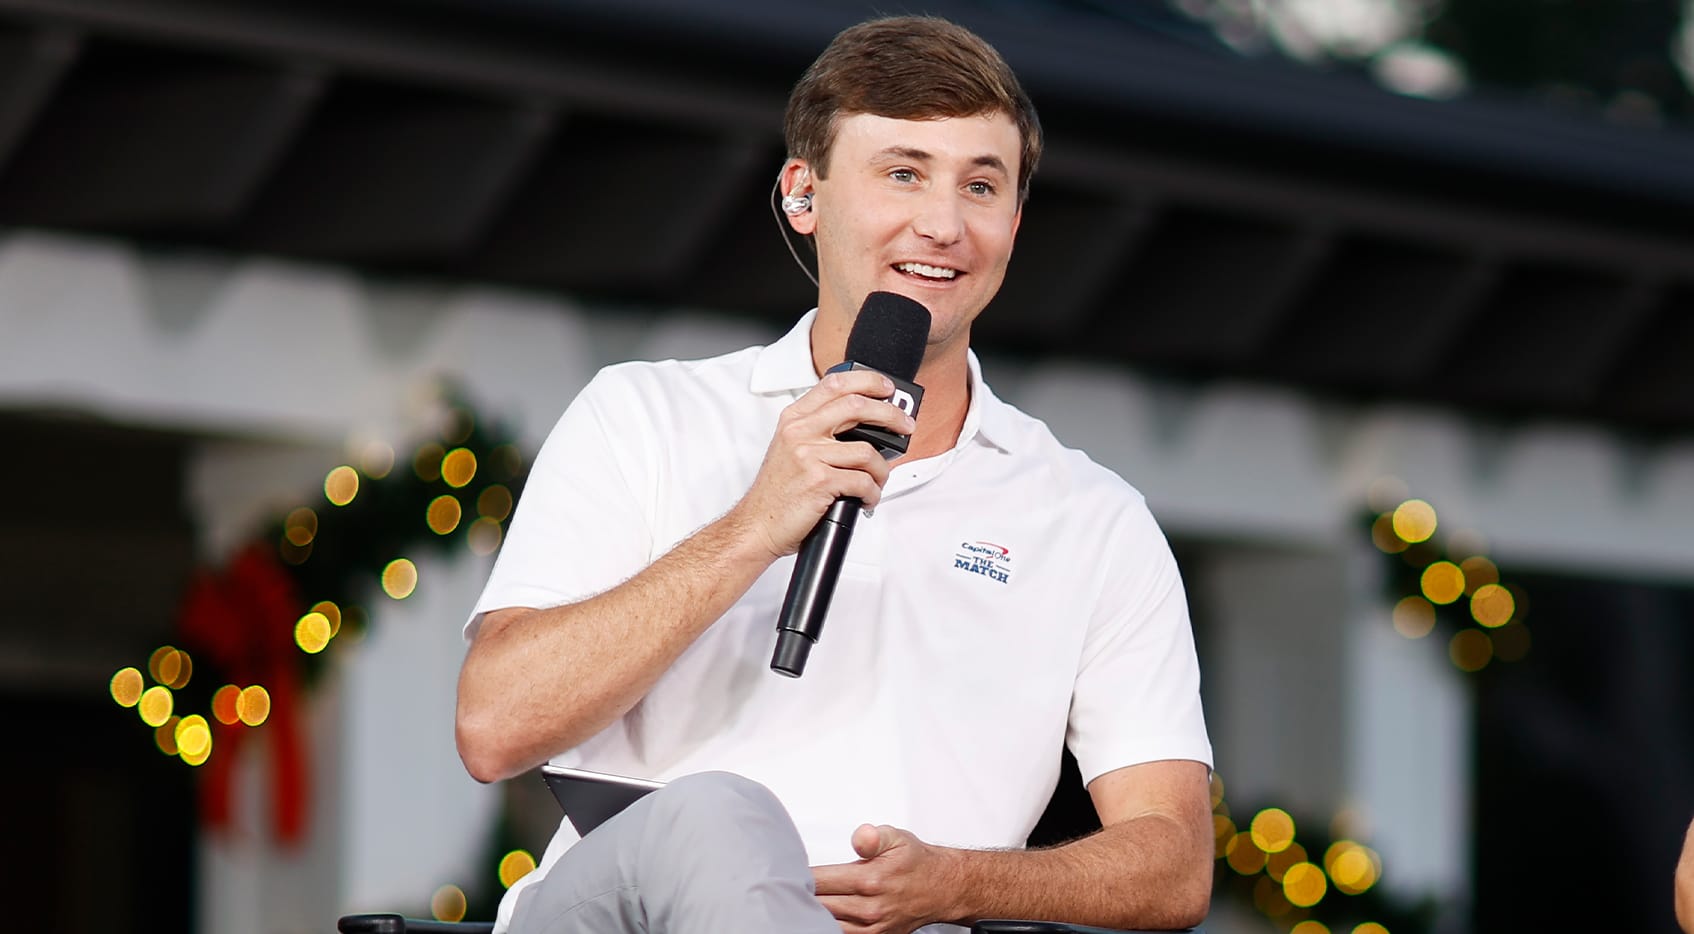 TOUR winners Brad Faxon, Smylie Kaufman to join NBCs commentary team